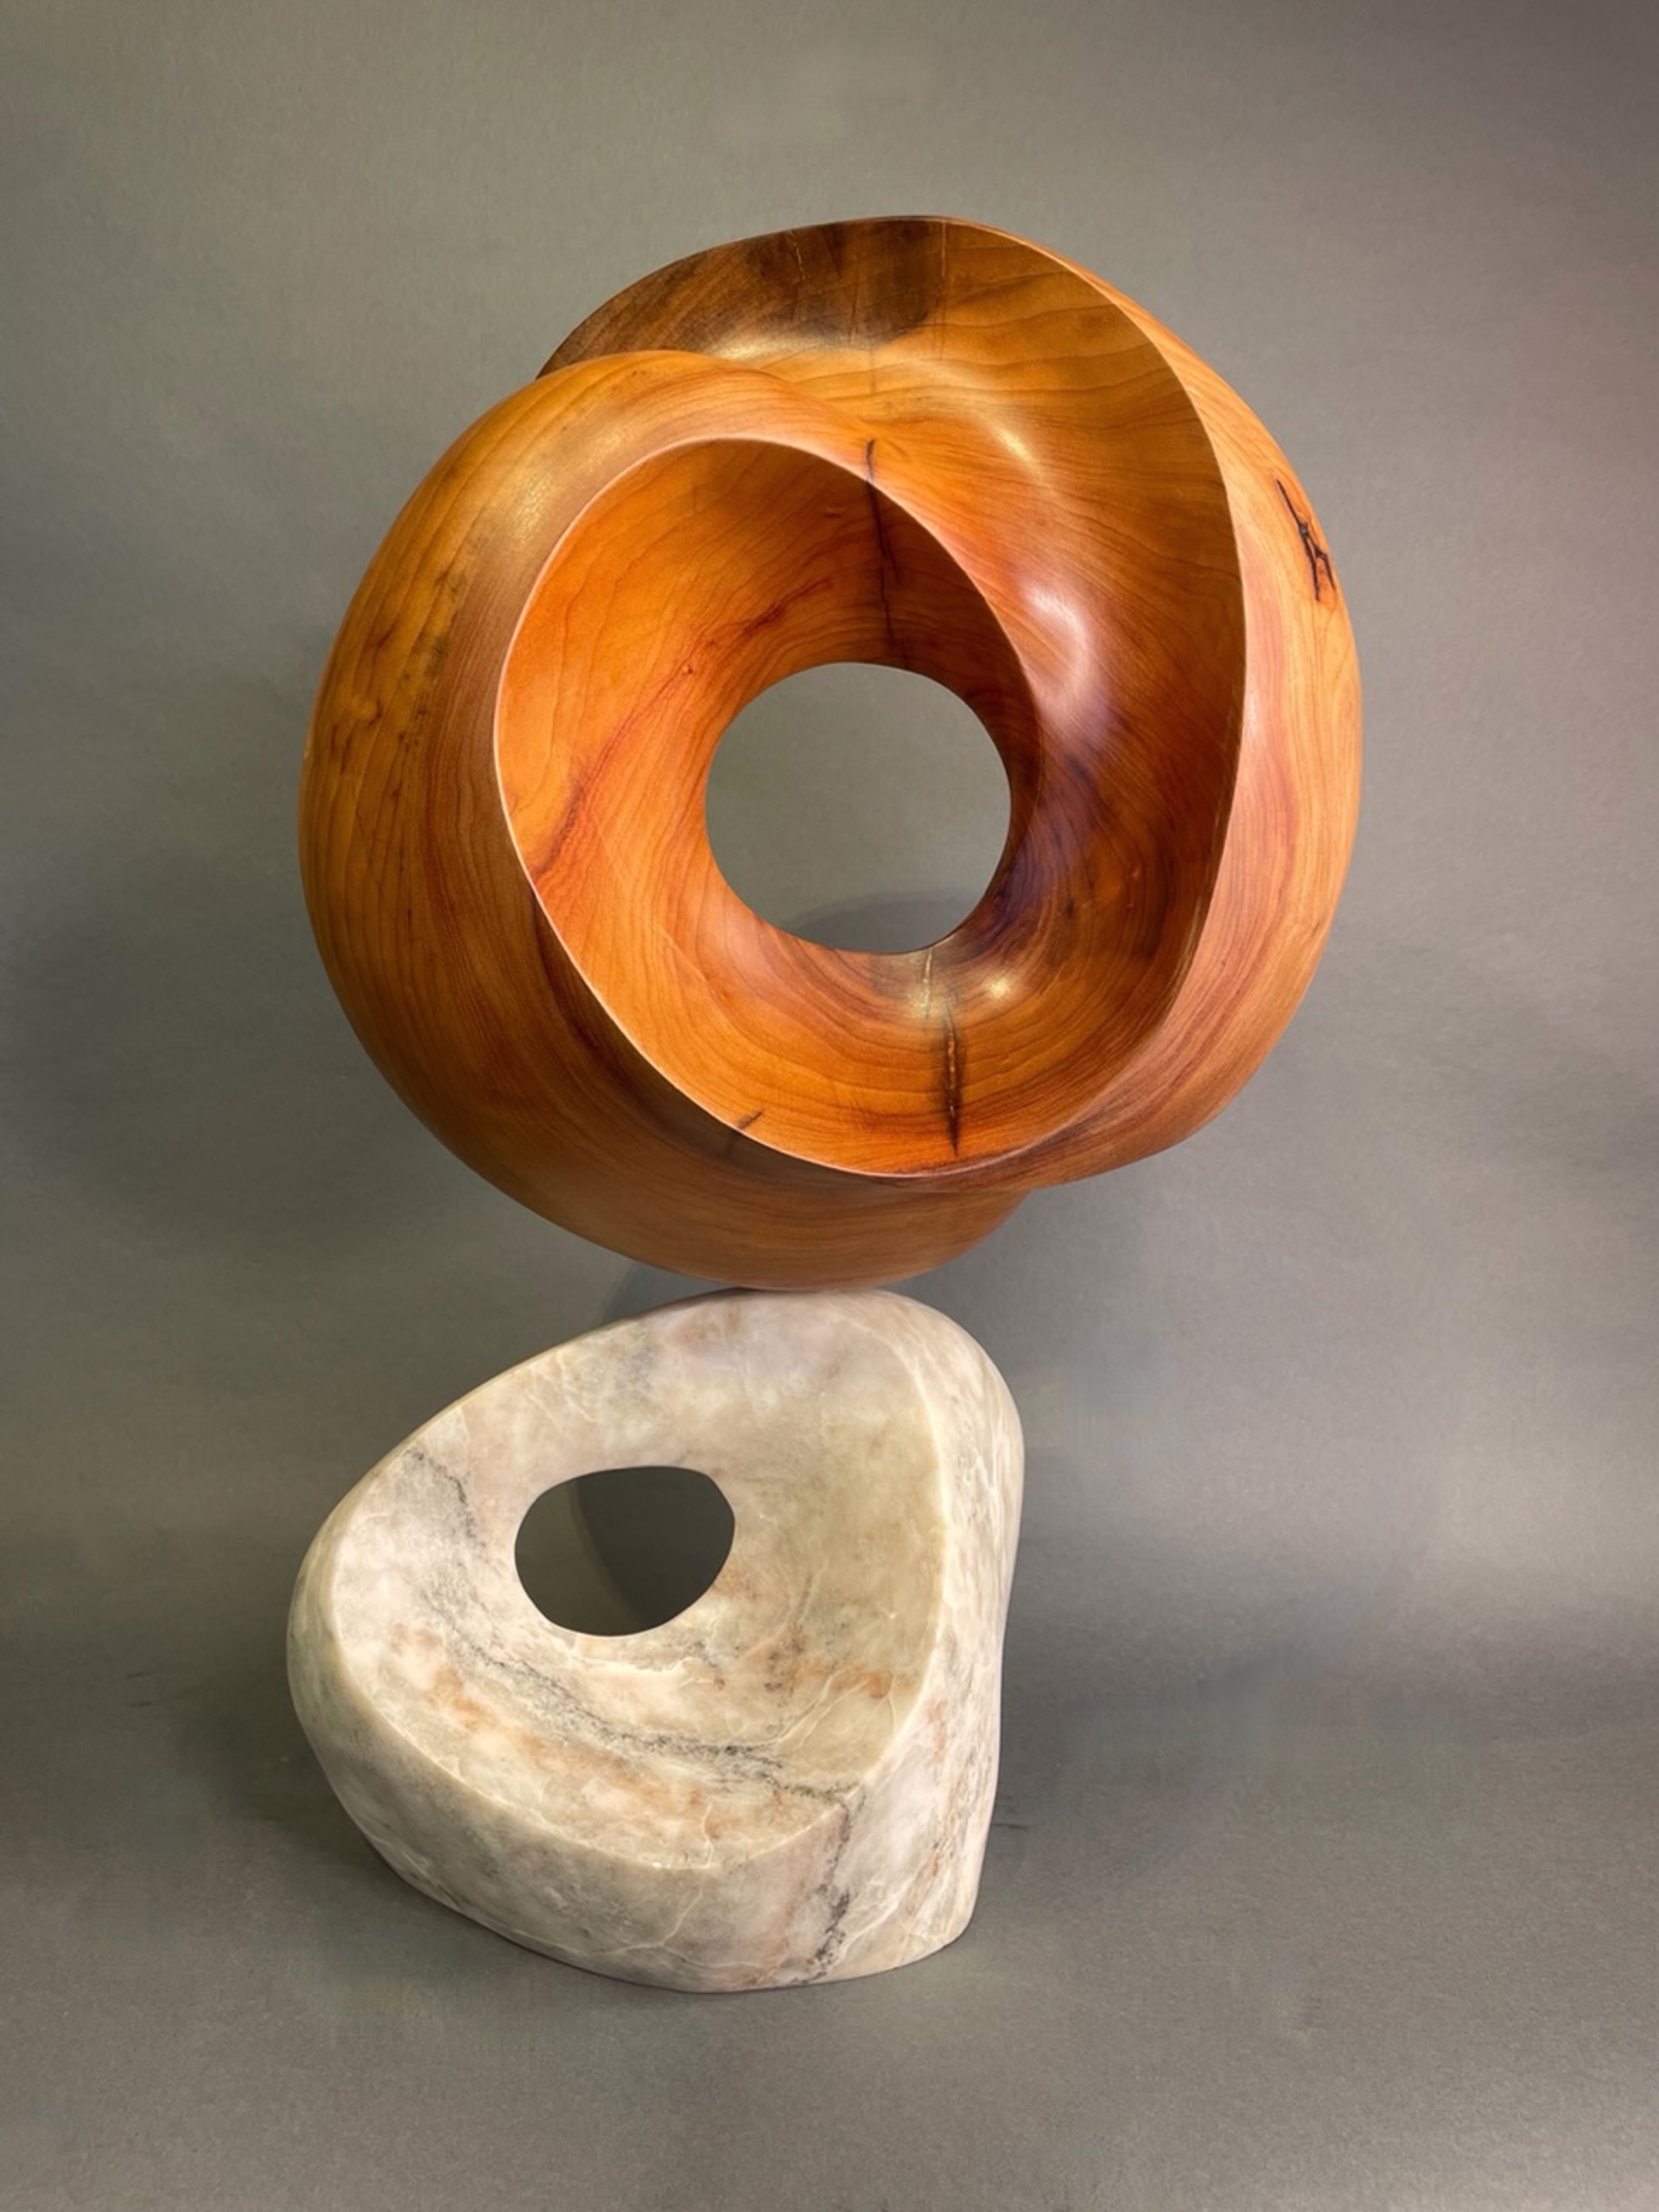 Introspect (CamphorWood and Alabaster) by Steve Turnbull